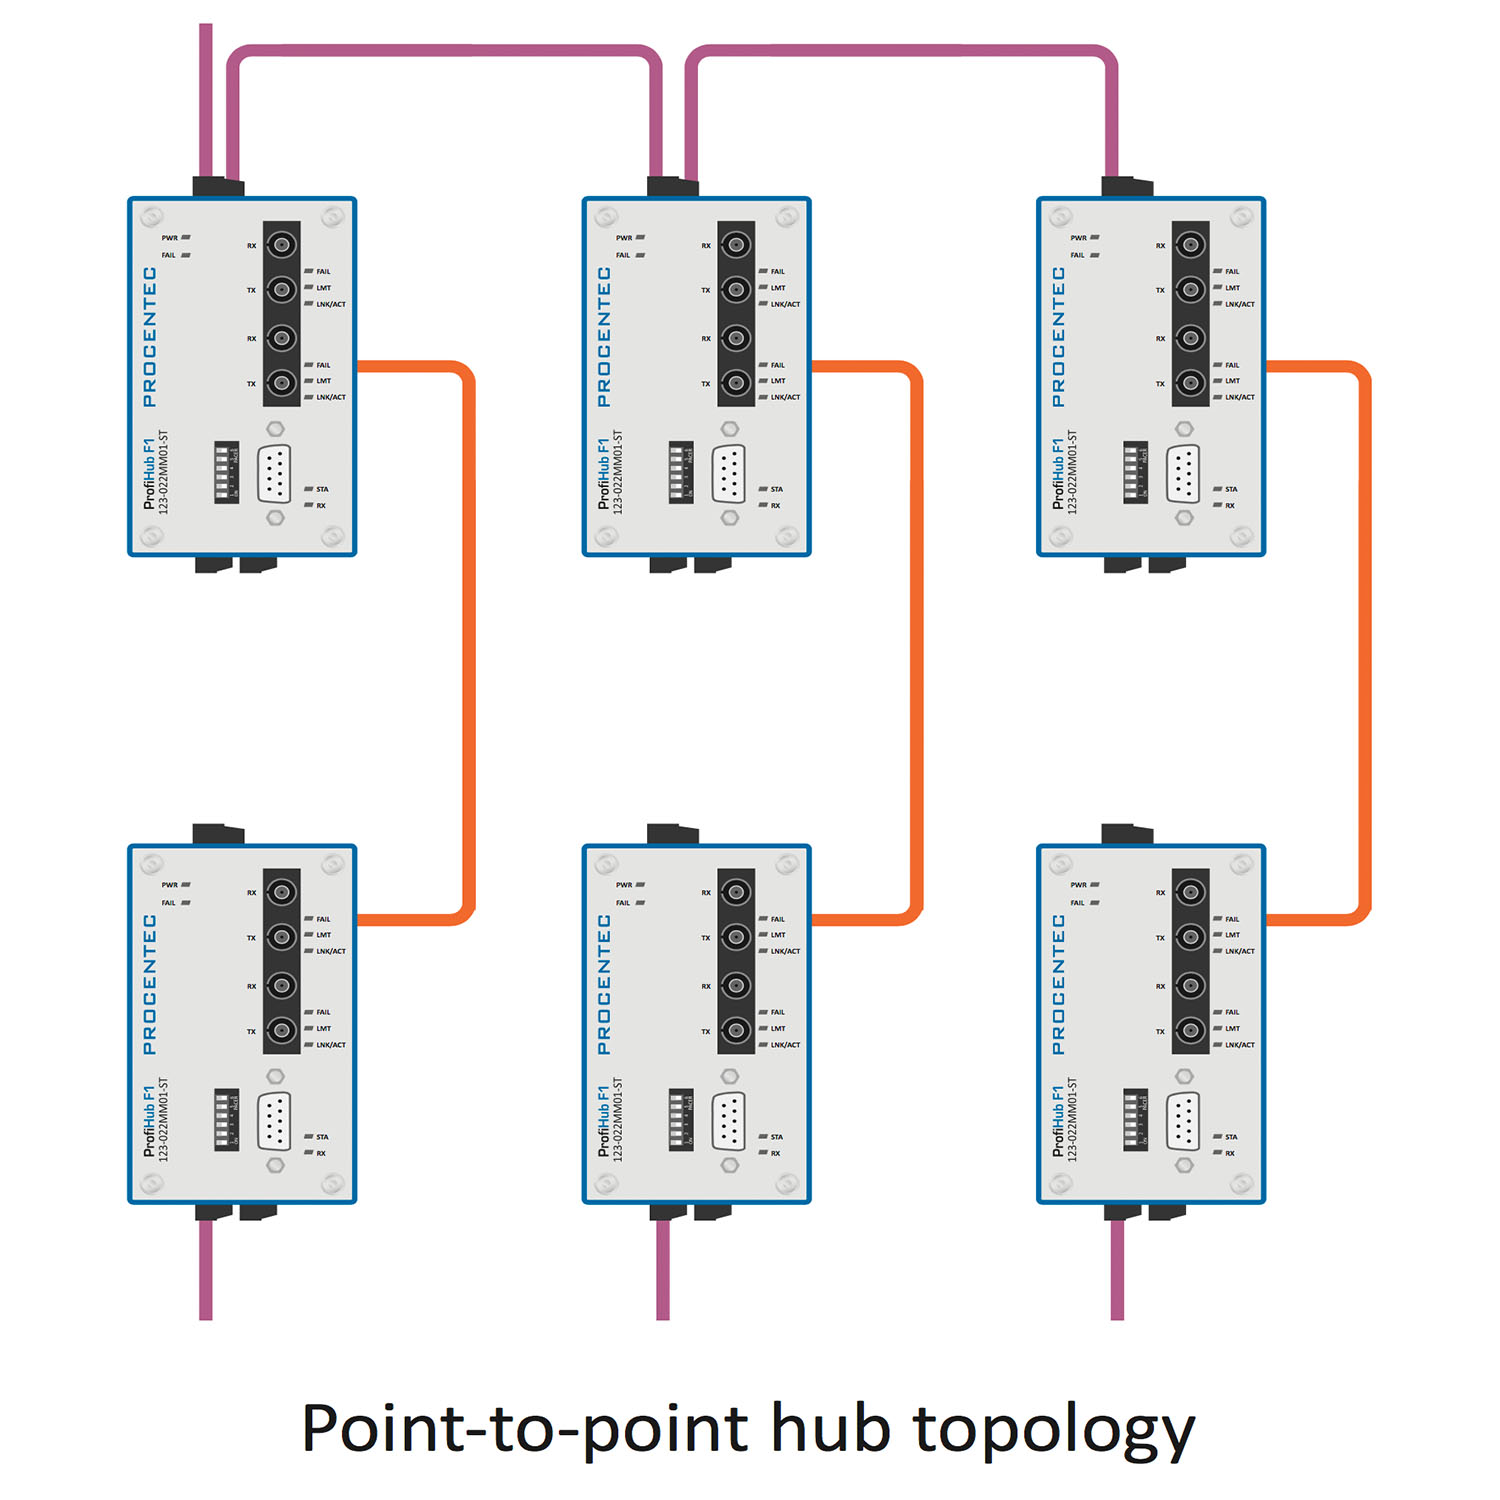 ProfiHub F1 Point-to-point structure